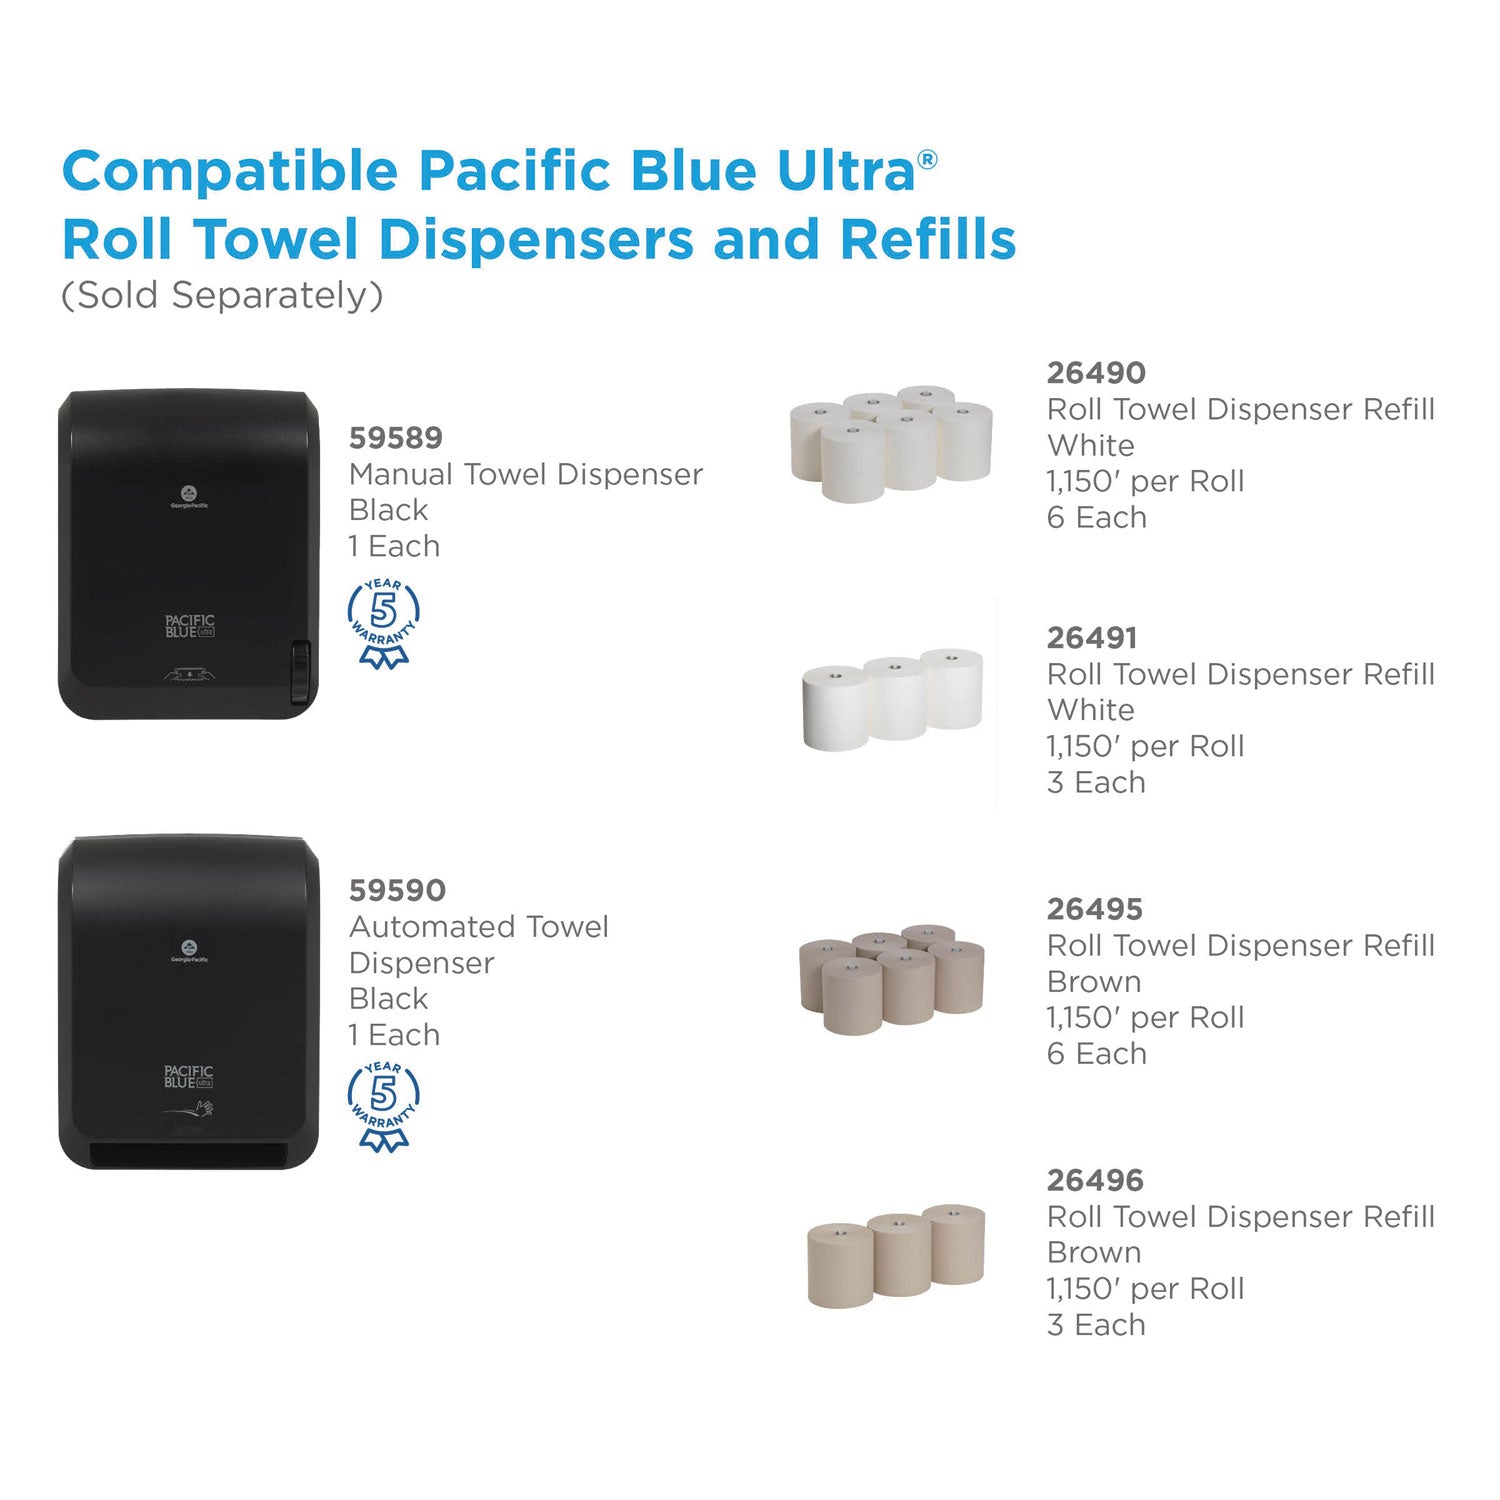 pacific-blue-ultra-paper-towels-1-ply-787-x-1150-ft-white-6-rolls-carton_gpc26490 - 4